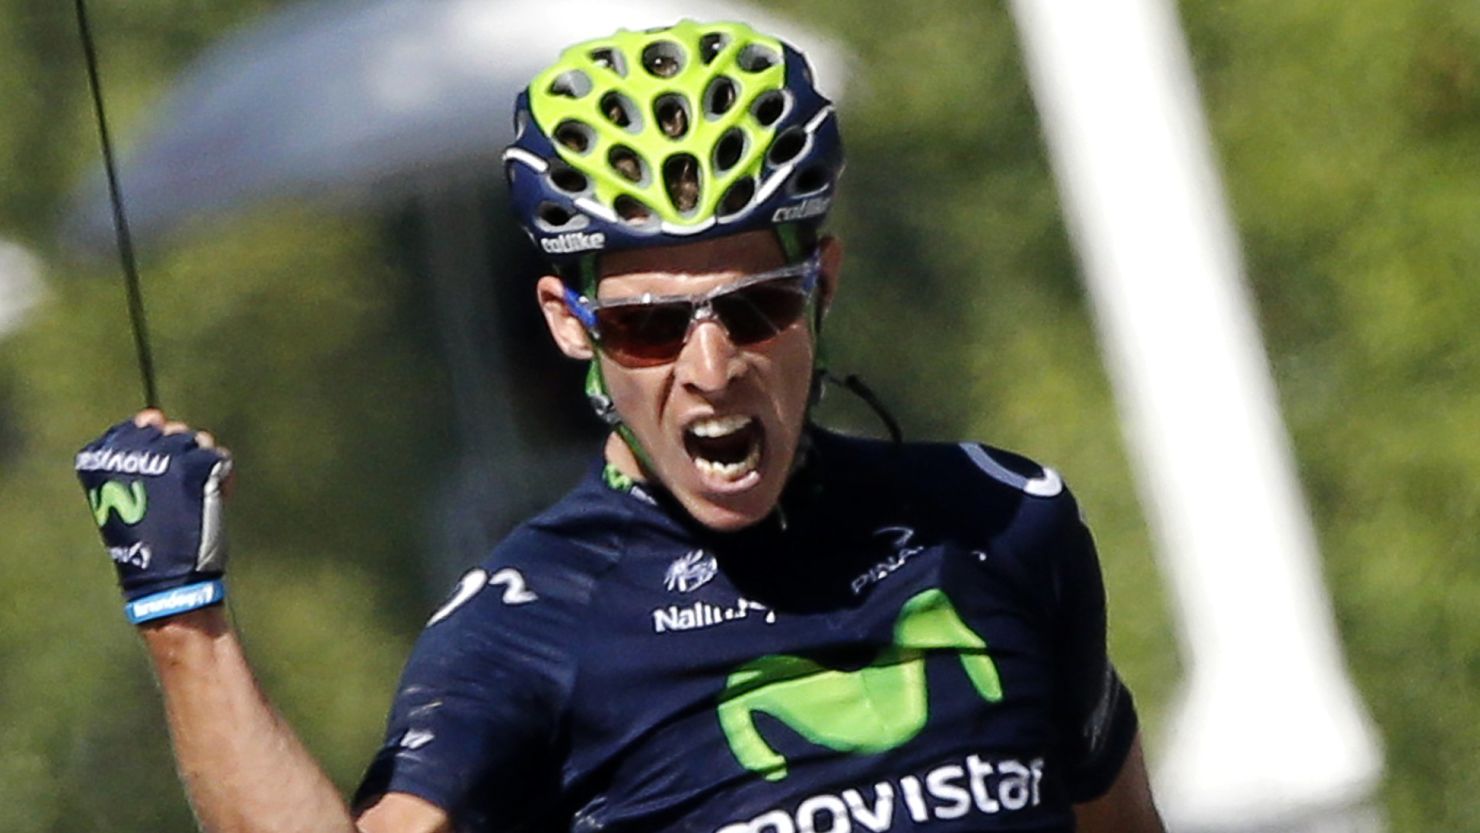 Rui Costa of the Movistar team wins the 16th stage of the Tour de France in Gap.